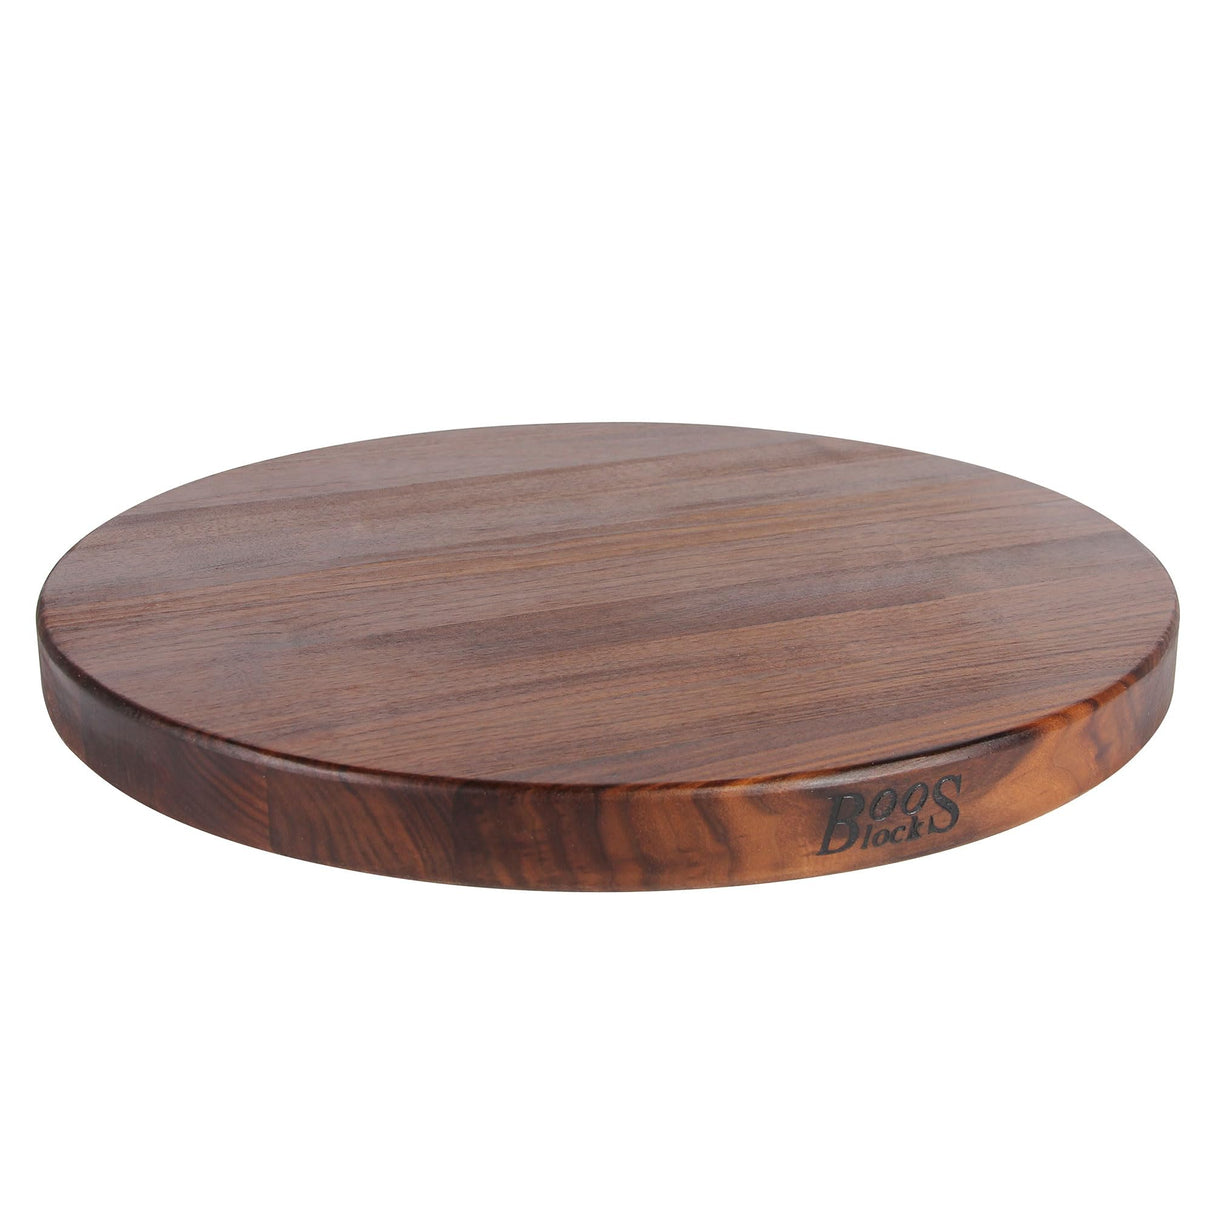 John Boos WAL-R18 Large Walnut Wood Cutting Board for Kitchen Prep 18 Inches Diameter, 1.5 Thick Reversible End Grain Round Charcuterie Block 18DIAX1.5 WAL-EDGE GR-REV-BRANDED